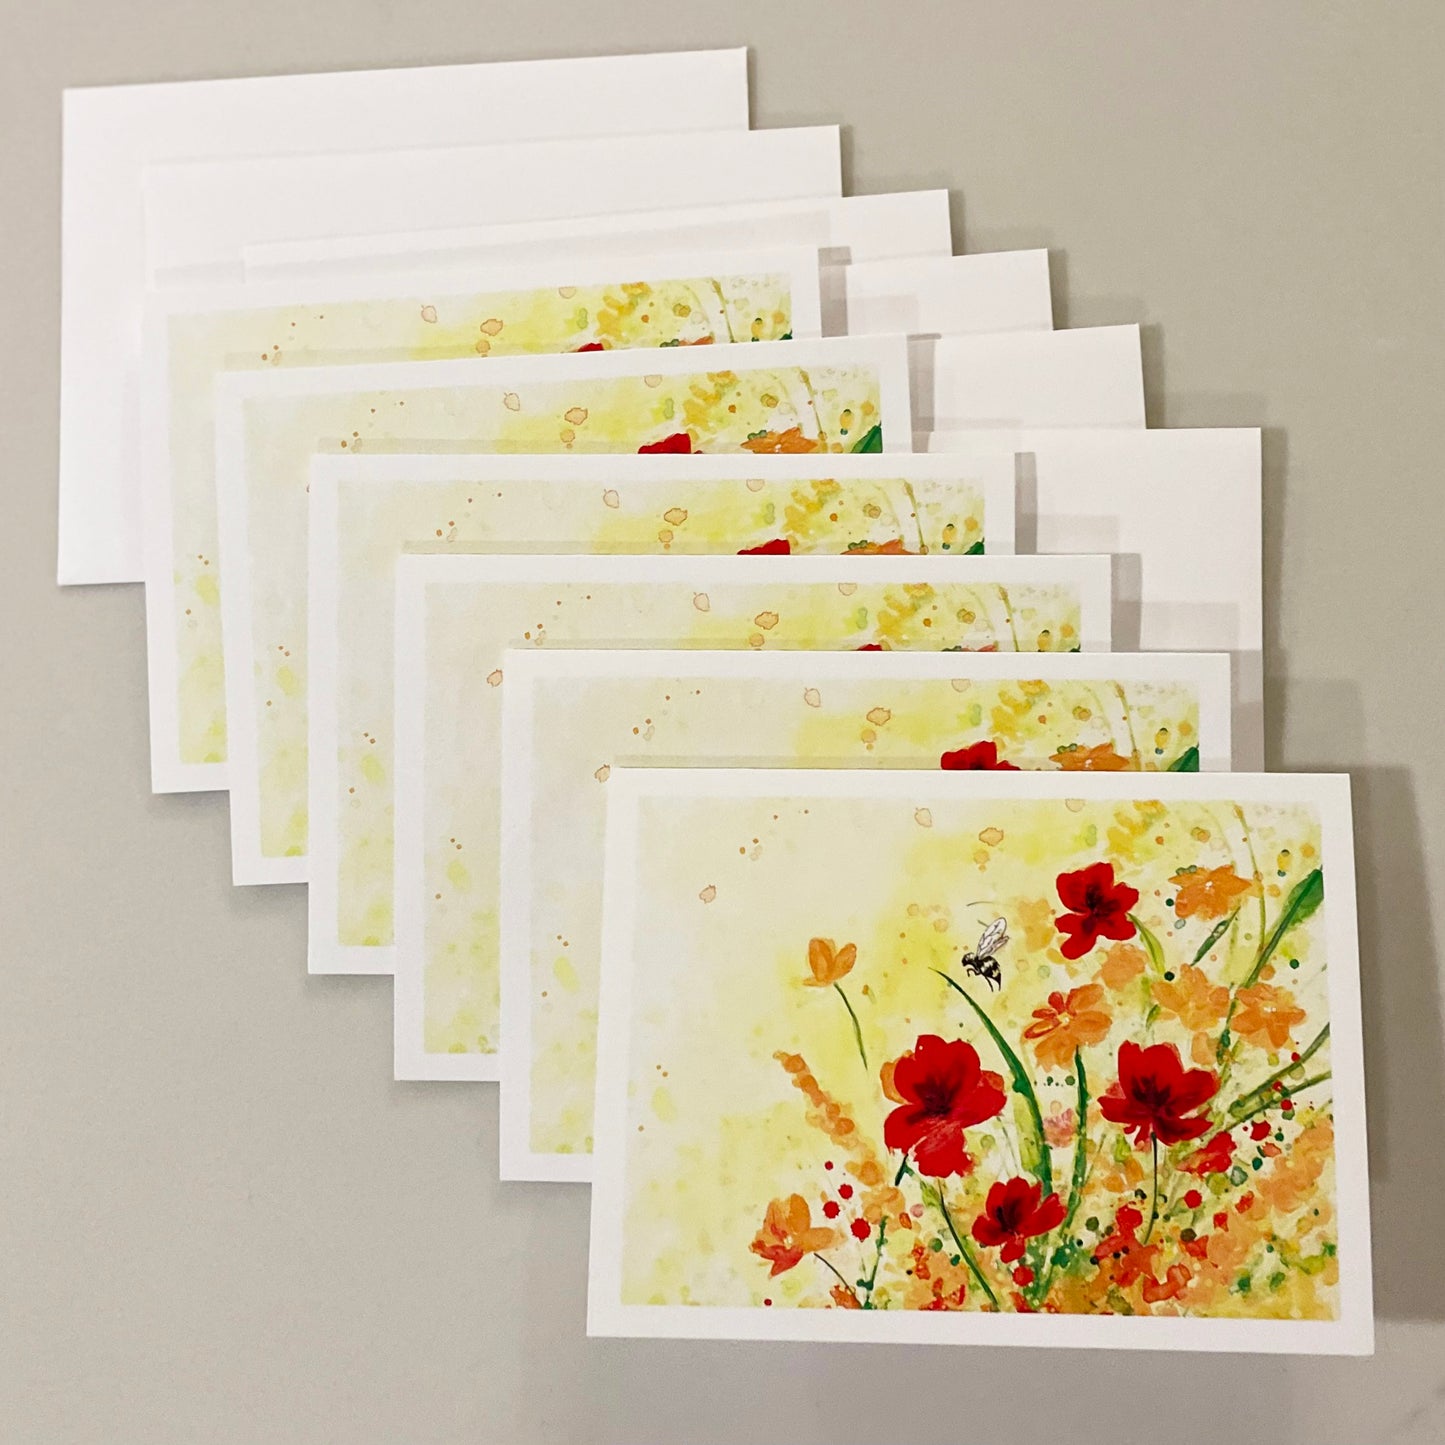 "Harvesting Hope" Greeting Card Gift Set (Includes six, 6x4" Cards and Envelopes)